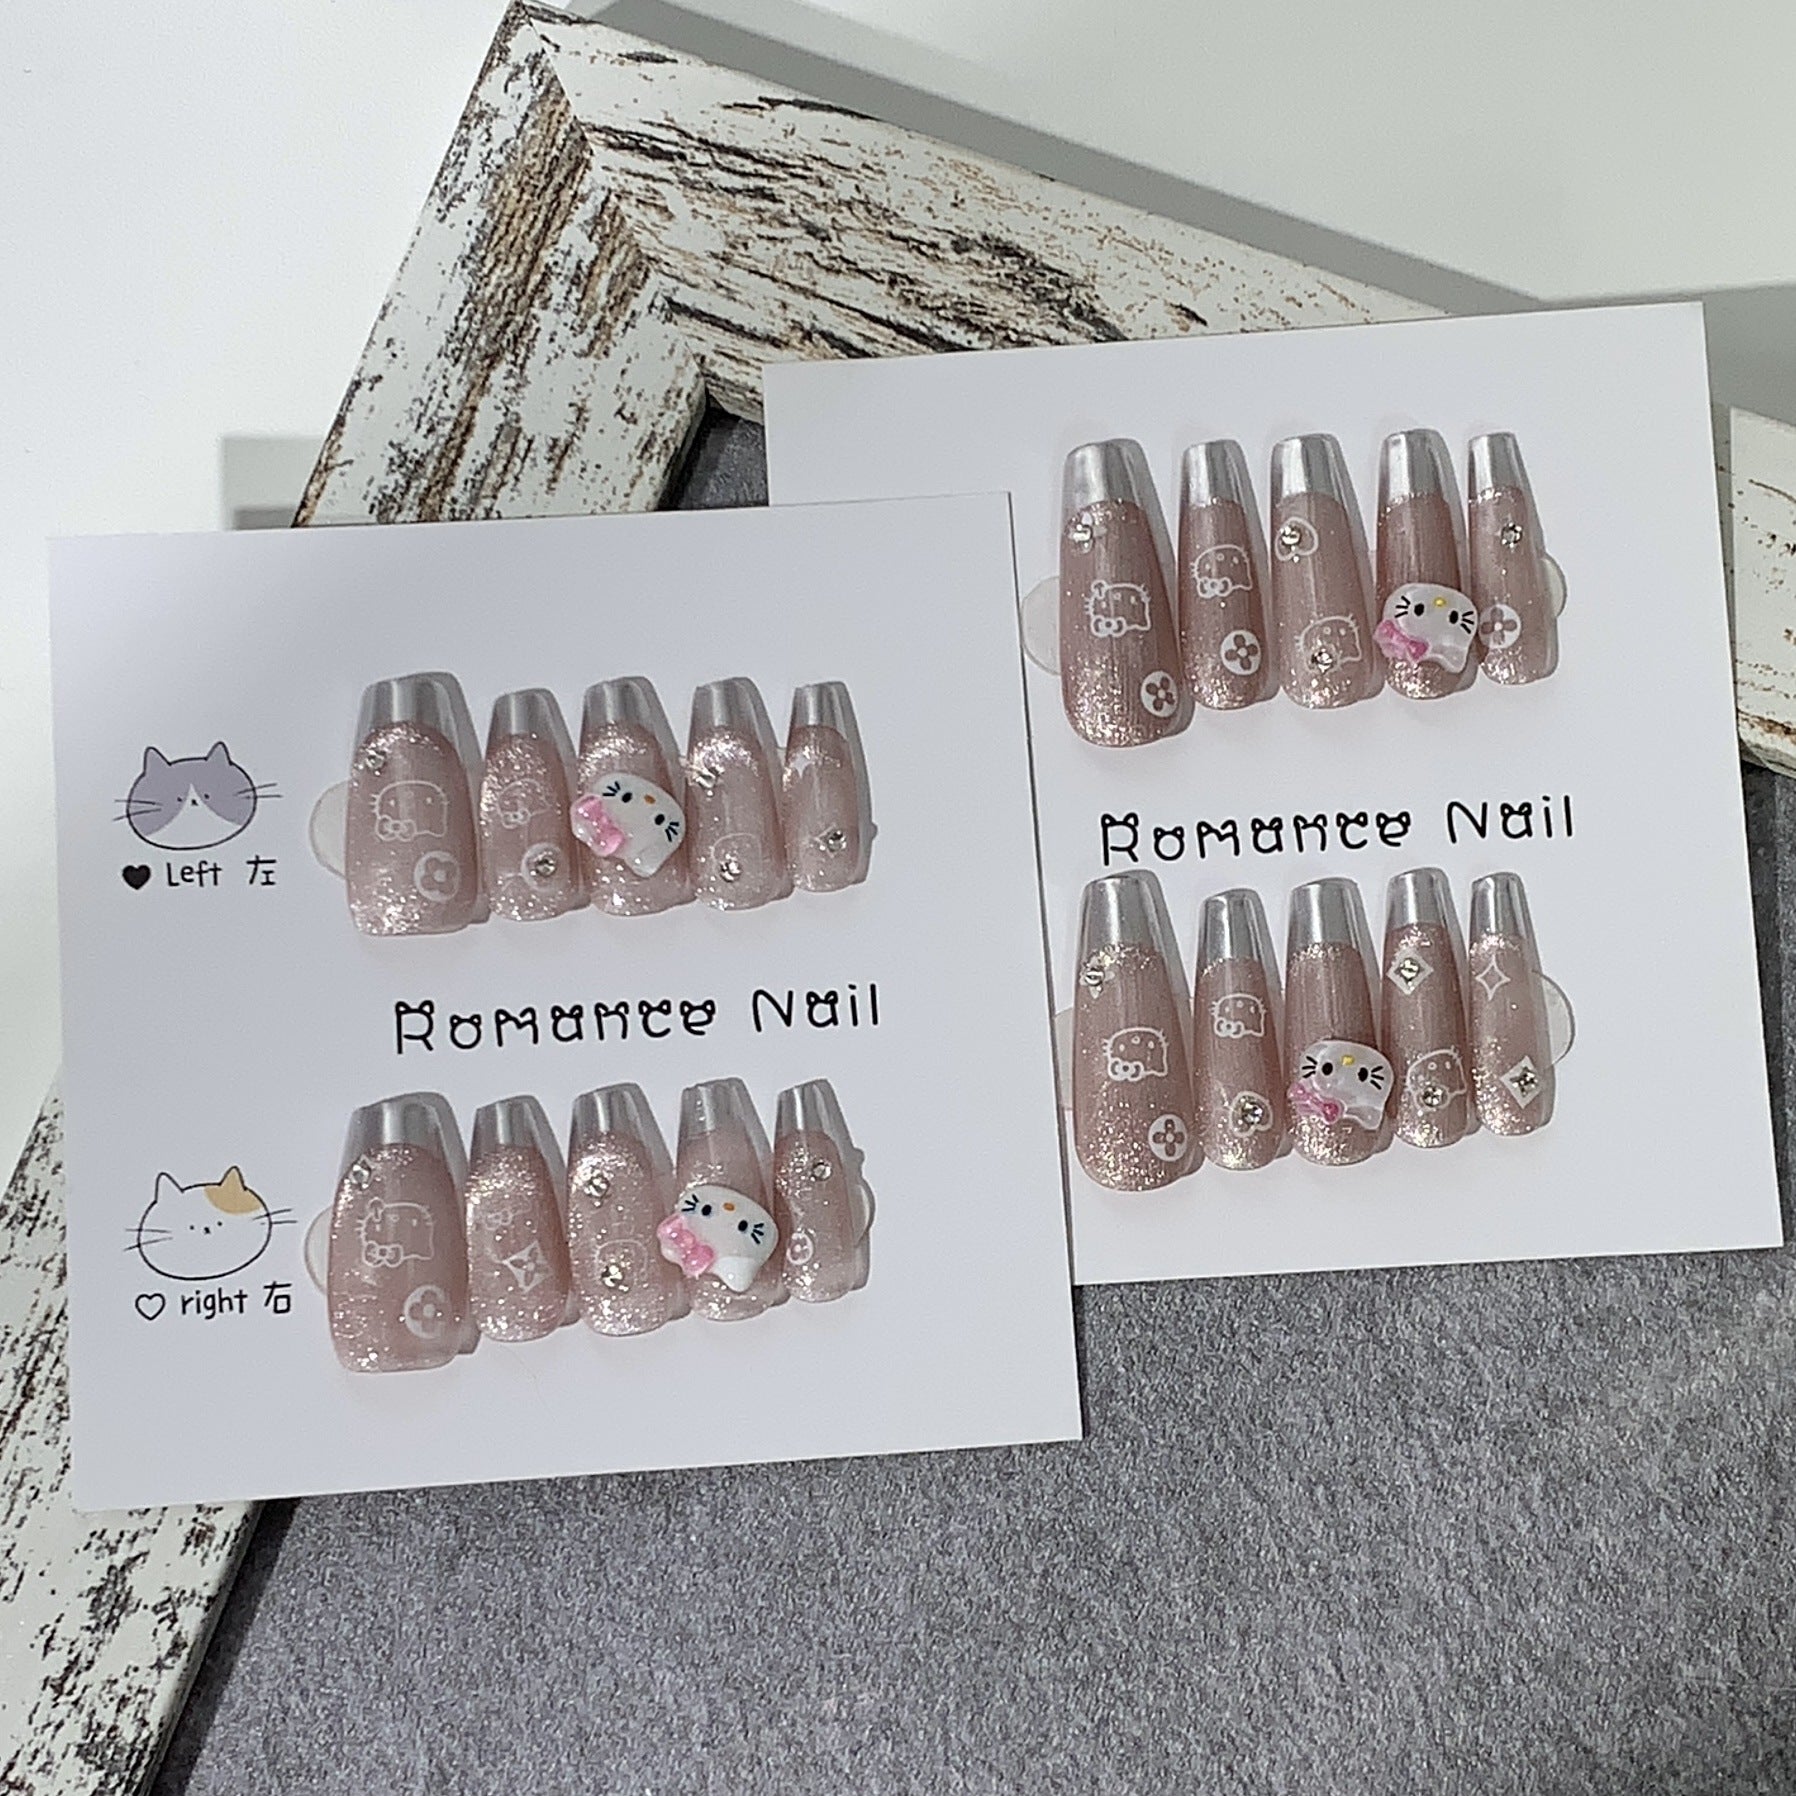 HELLO KITTY-TEN PIECES OF HANDCRAFTED PRESS ON NAIL